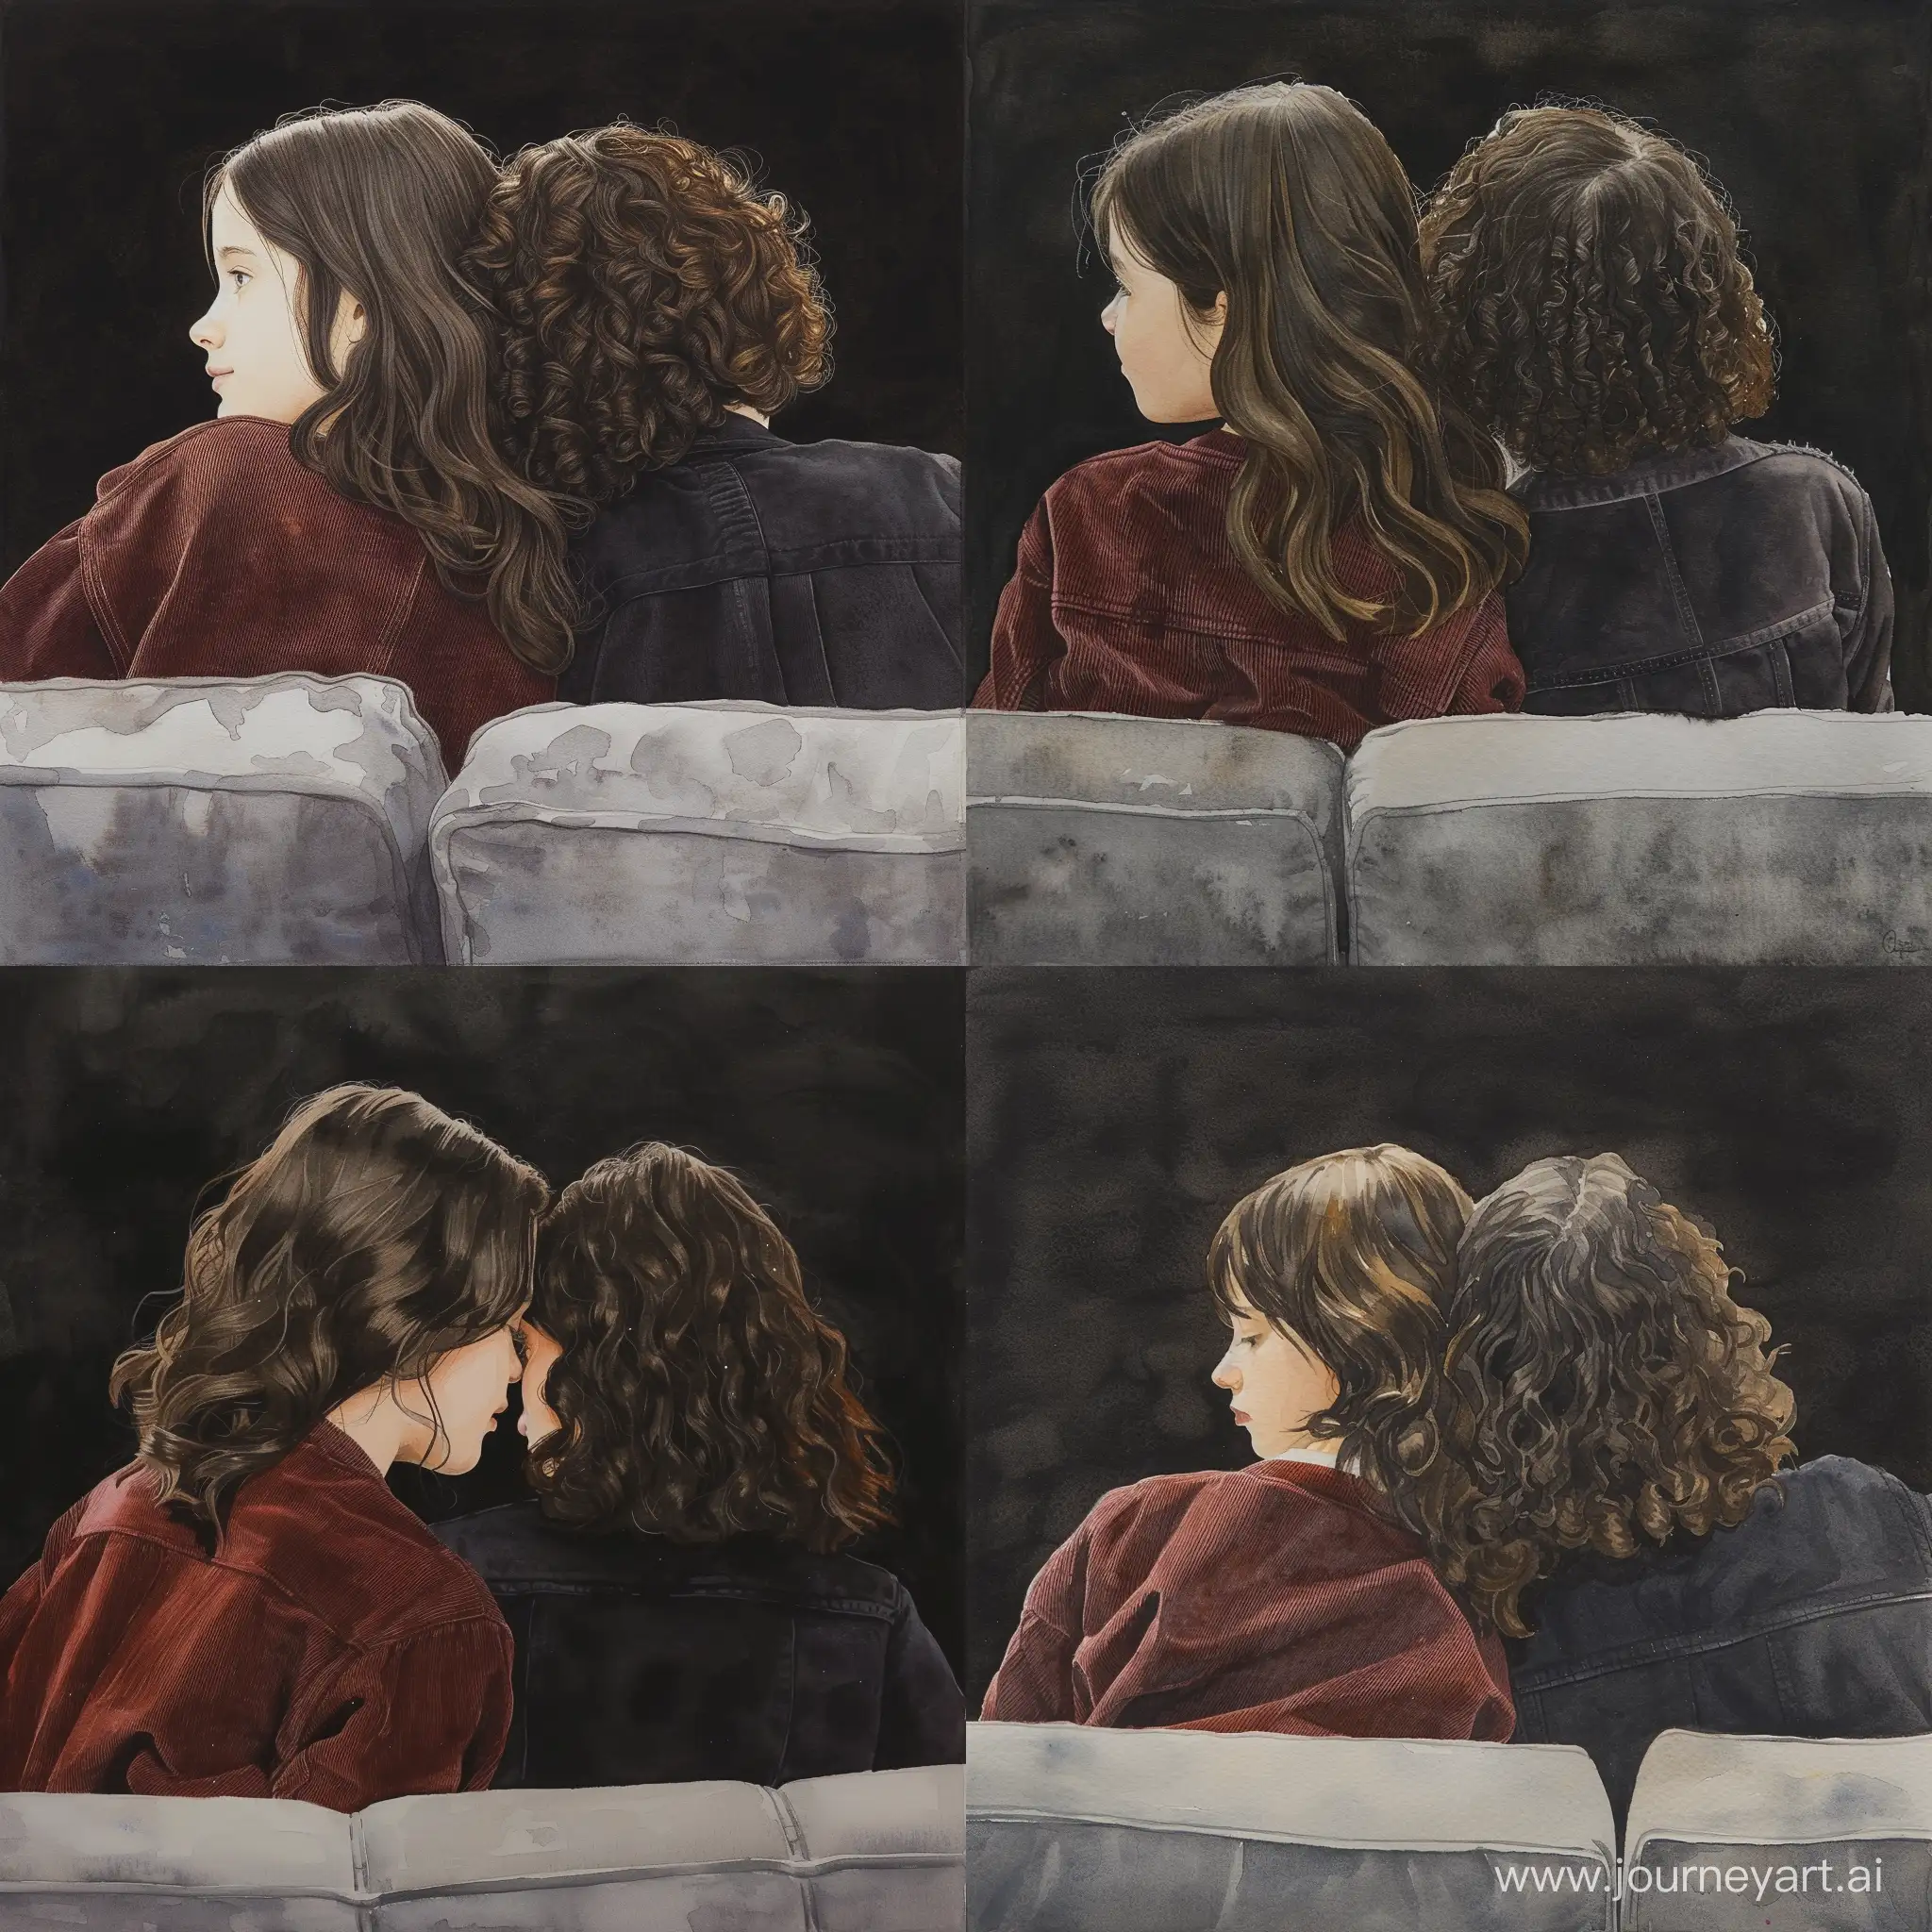 Two teenage girls are sitting on a gray sofa from behind and behind. One of the girls has wavy dark brown hair and white skin and is wearing a crimson corduroy jacket with her head on the other girl's shoulder. The other girl has very curly dark brown hair. And her skin is white and she is a little shorter than the other girl and she is wearing a black corduroy jacket. The background is too dark. watercolor painting